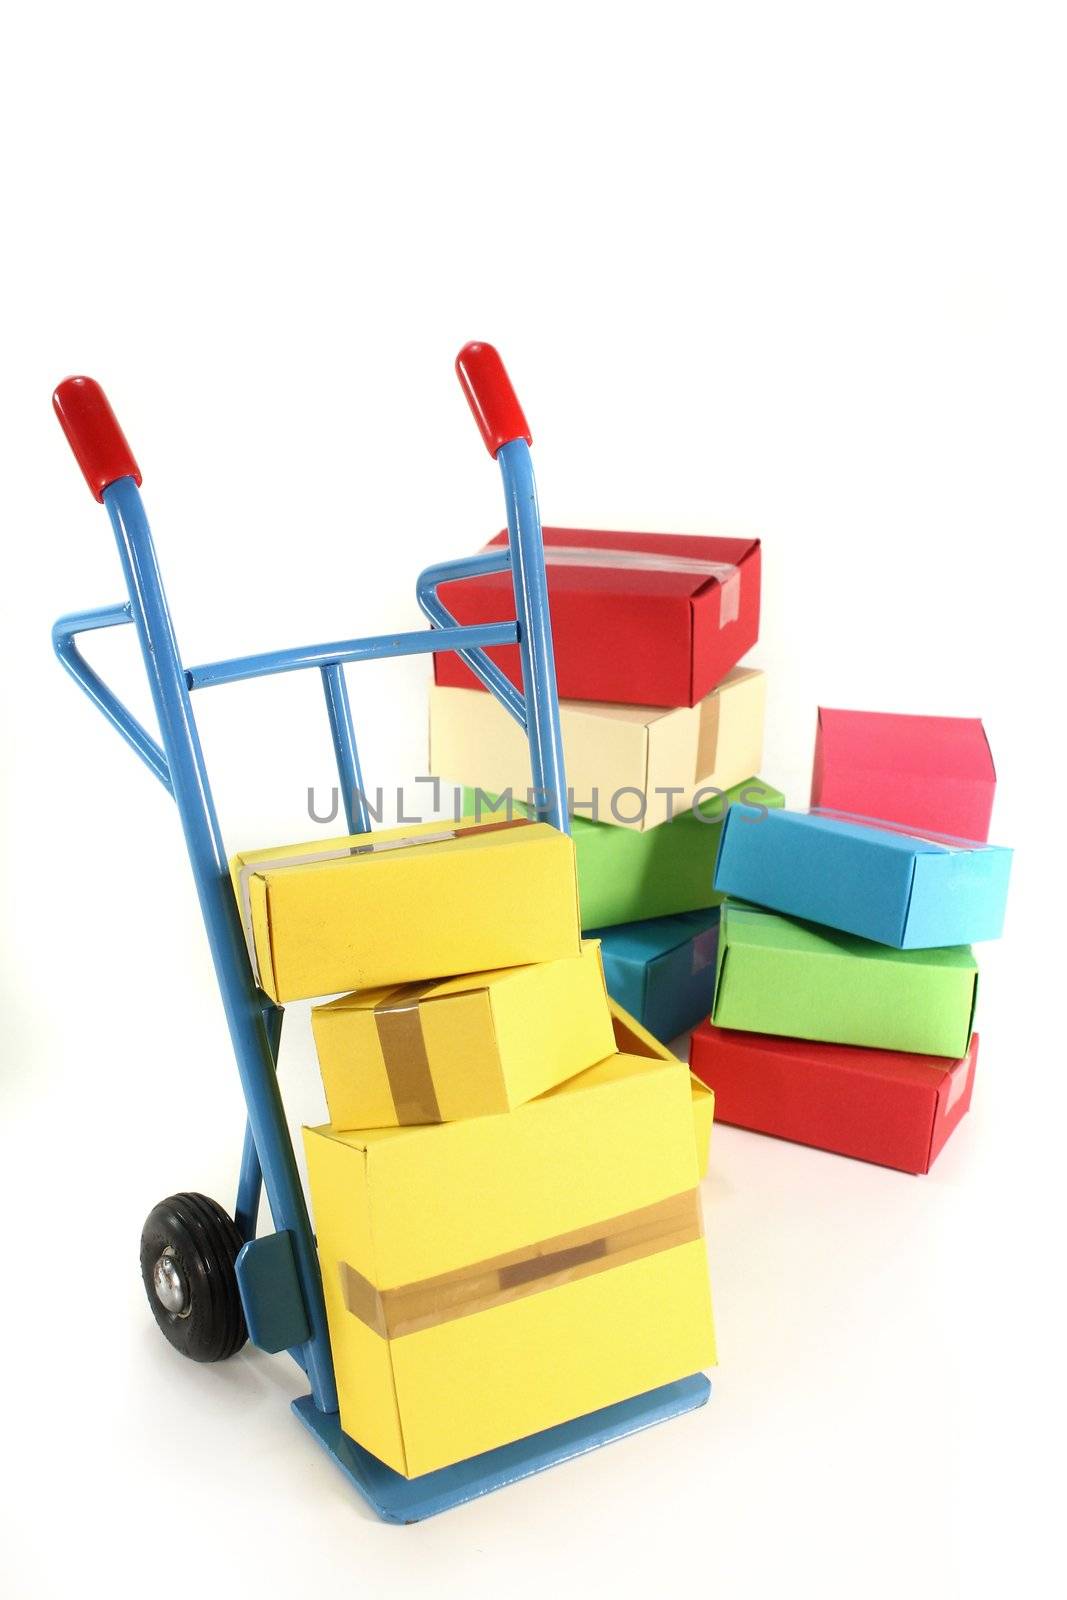 a hand truck with various packages on a white background